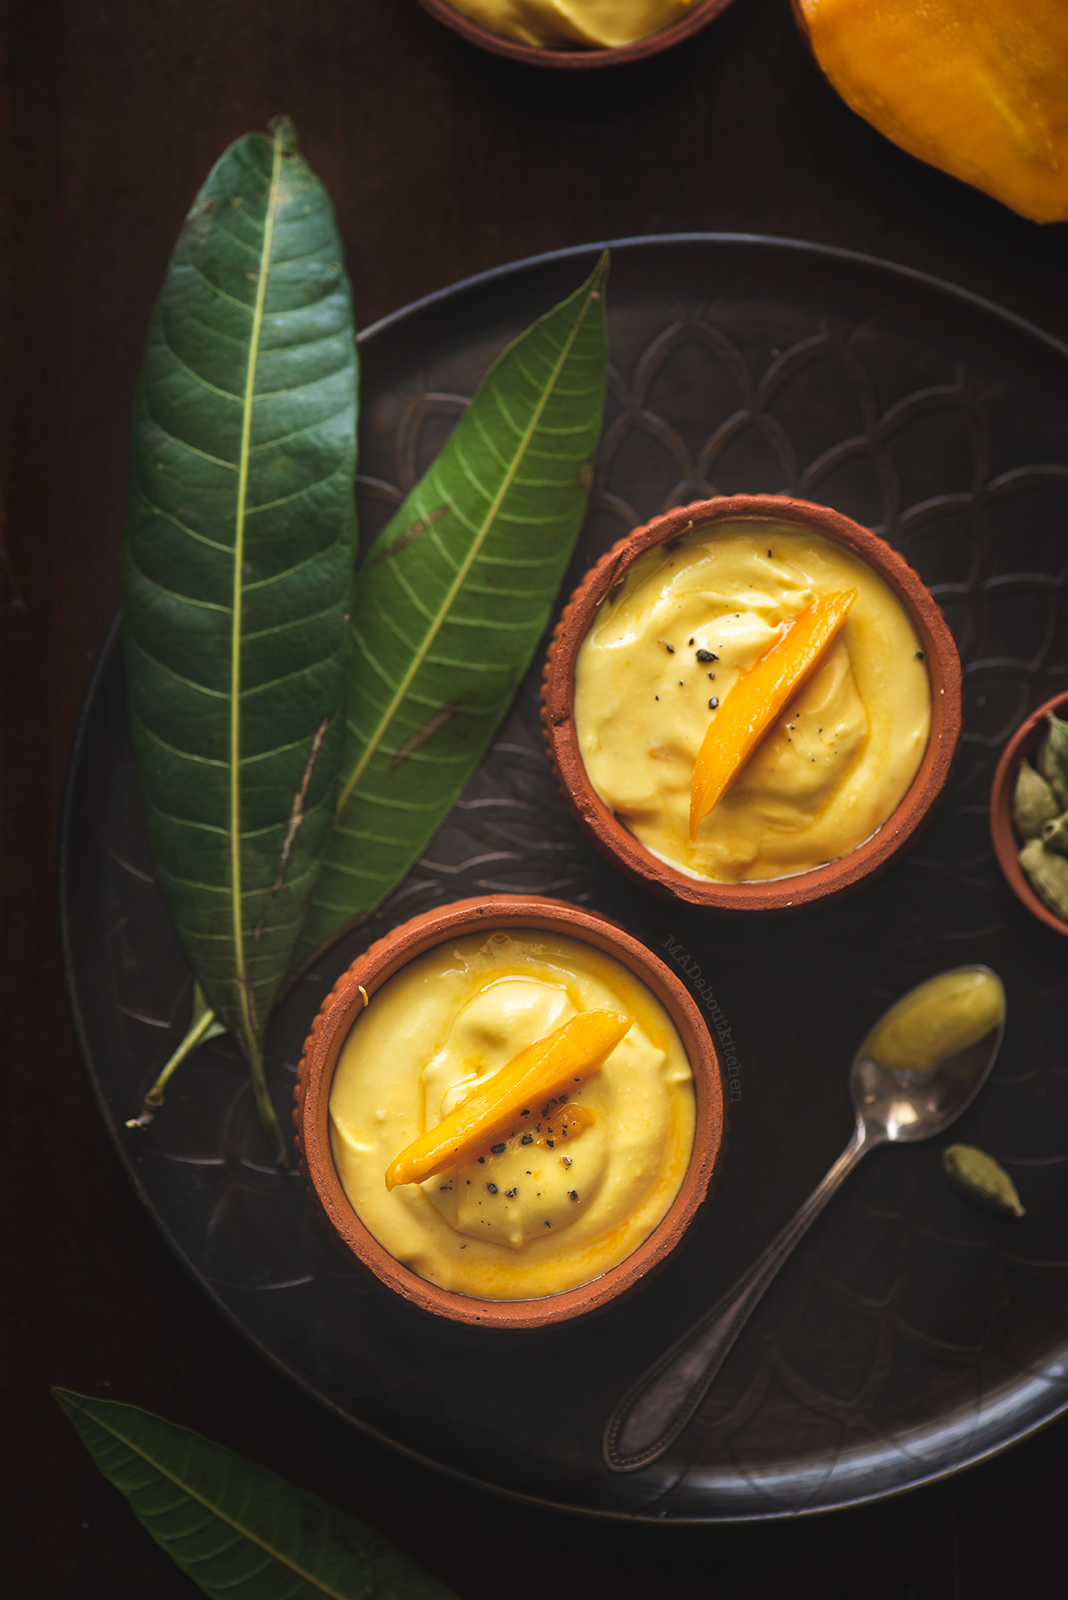 Mango Shrikhand is nothing but Mango flavoured yogurt that is absolutely rich,silky and creamy and is served chilled as dessert or with Poori.